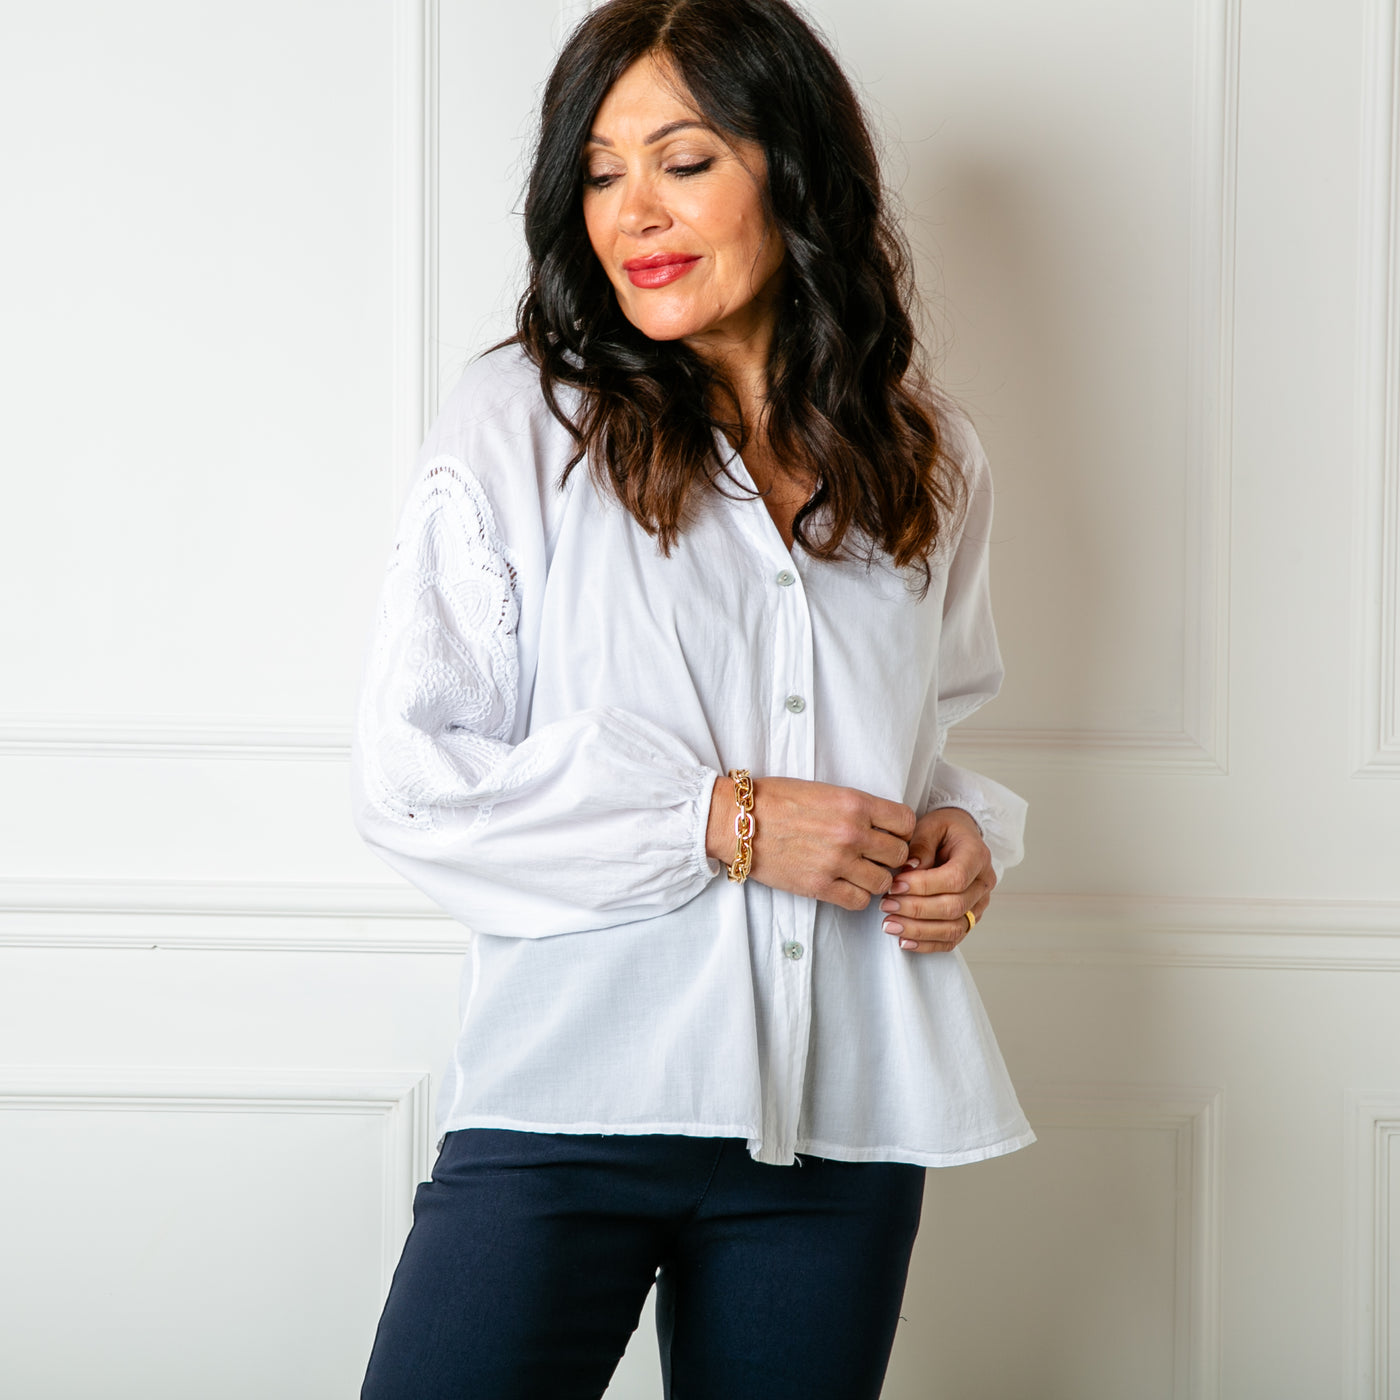 The Balloon Sleeve Shirt in white with long sleeves featuring beautiful broderie embroidery detailing